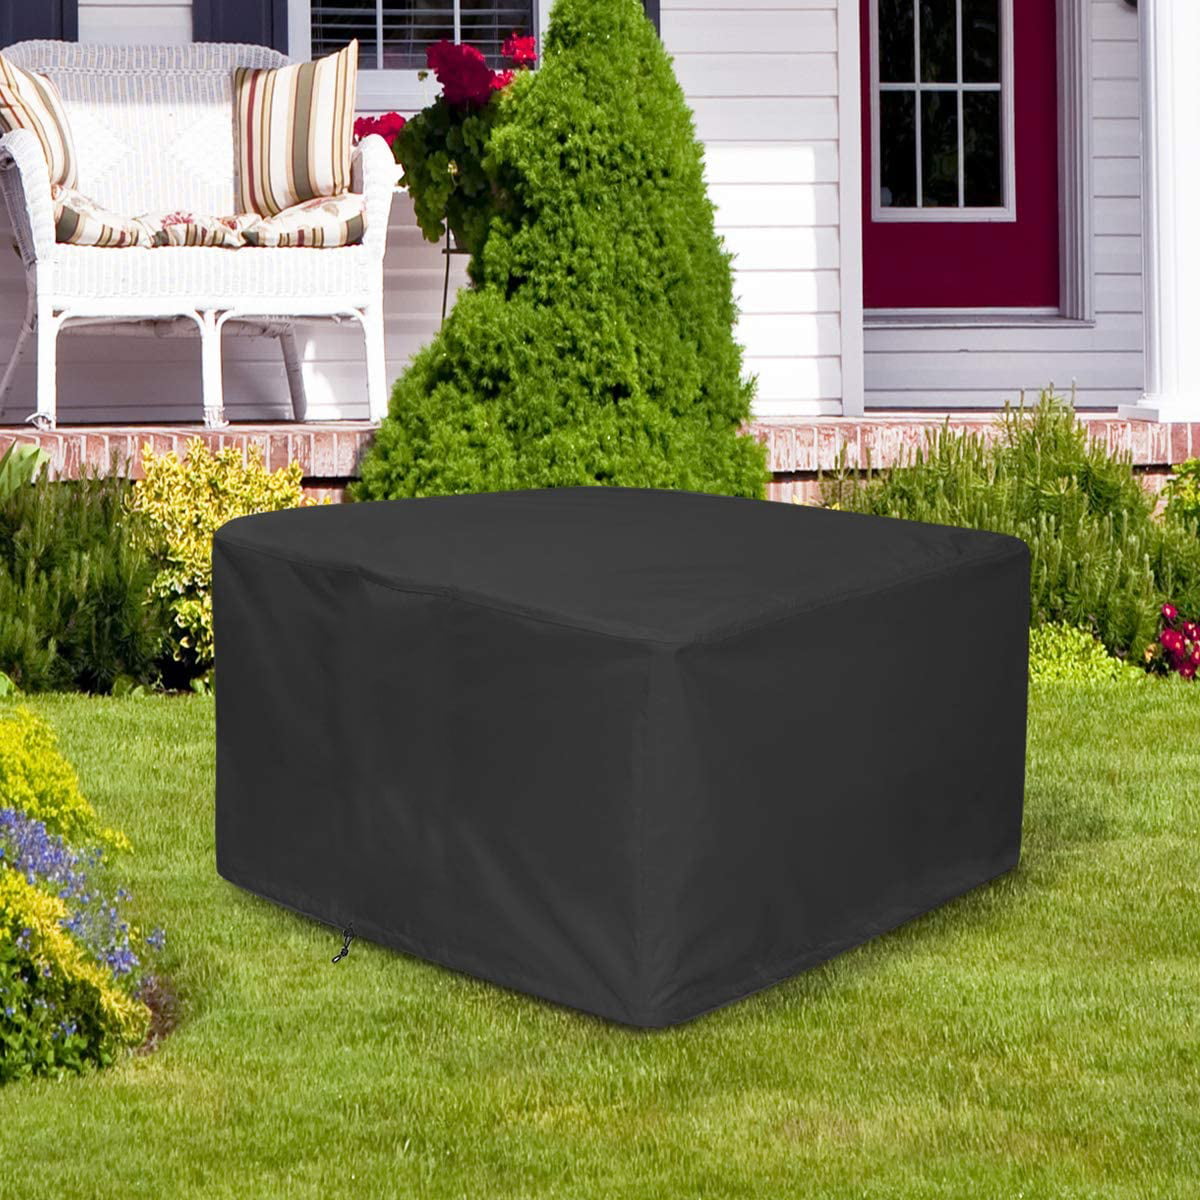 Gas Fire Pit Table Cover Square 32 Inch, Outdoor Patio Fire Pit Cover